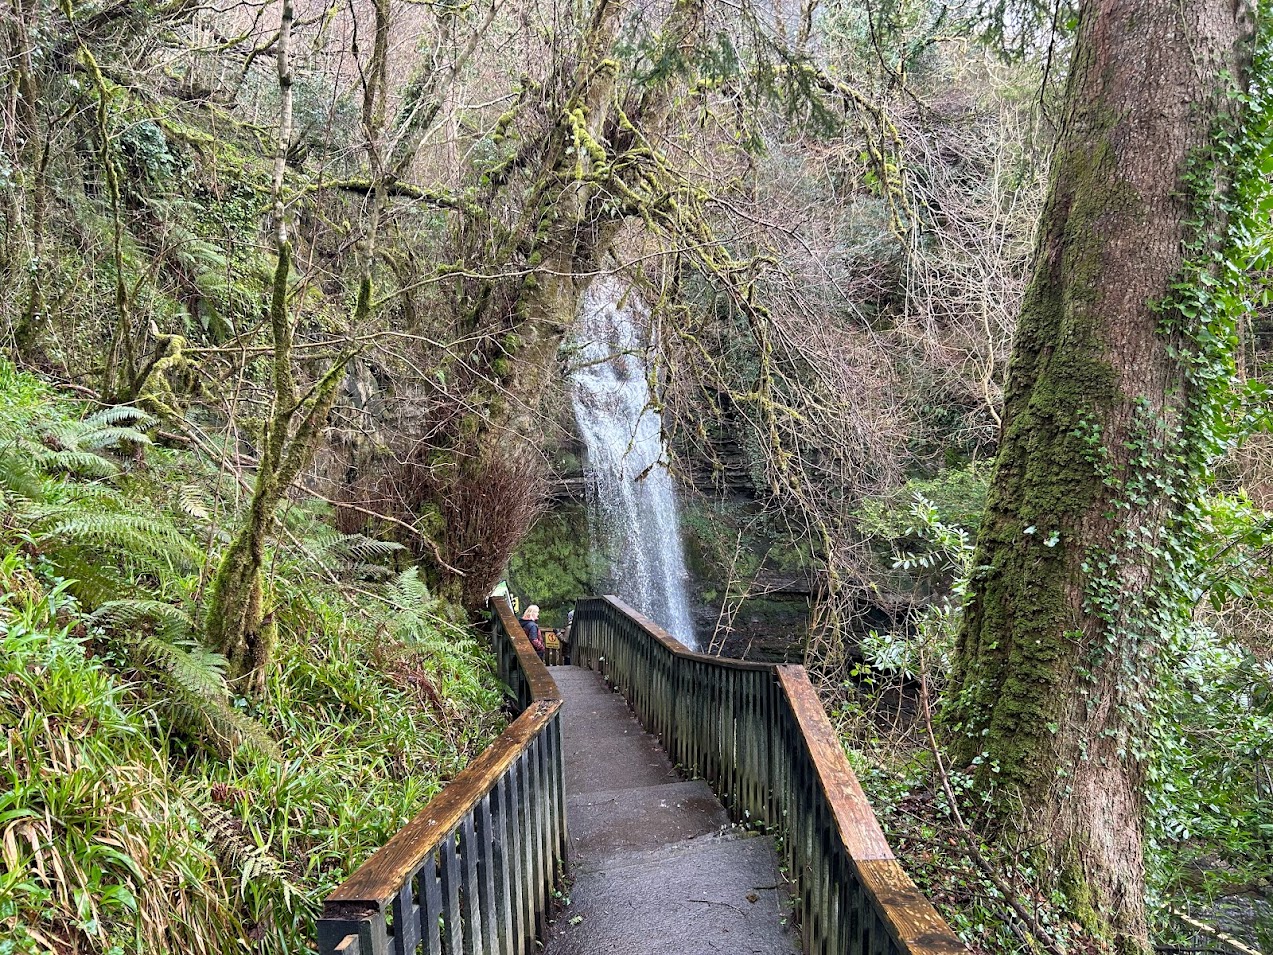 wooden walkway during a hike leading to a waterfall